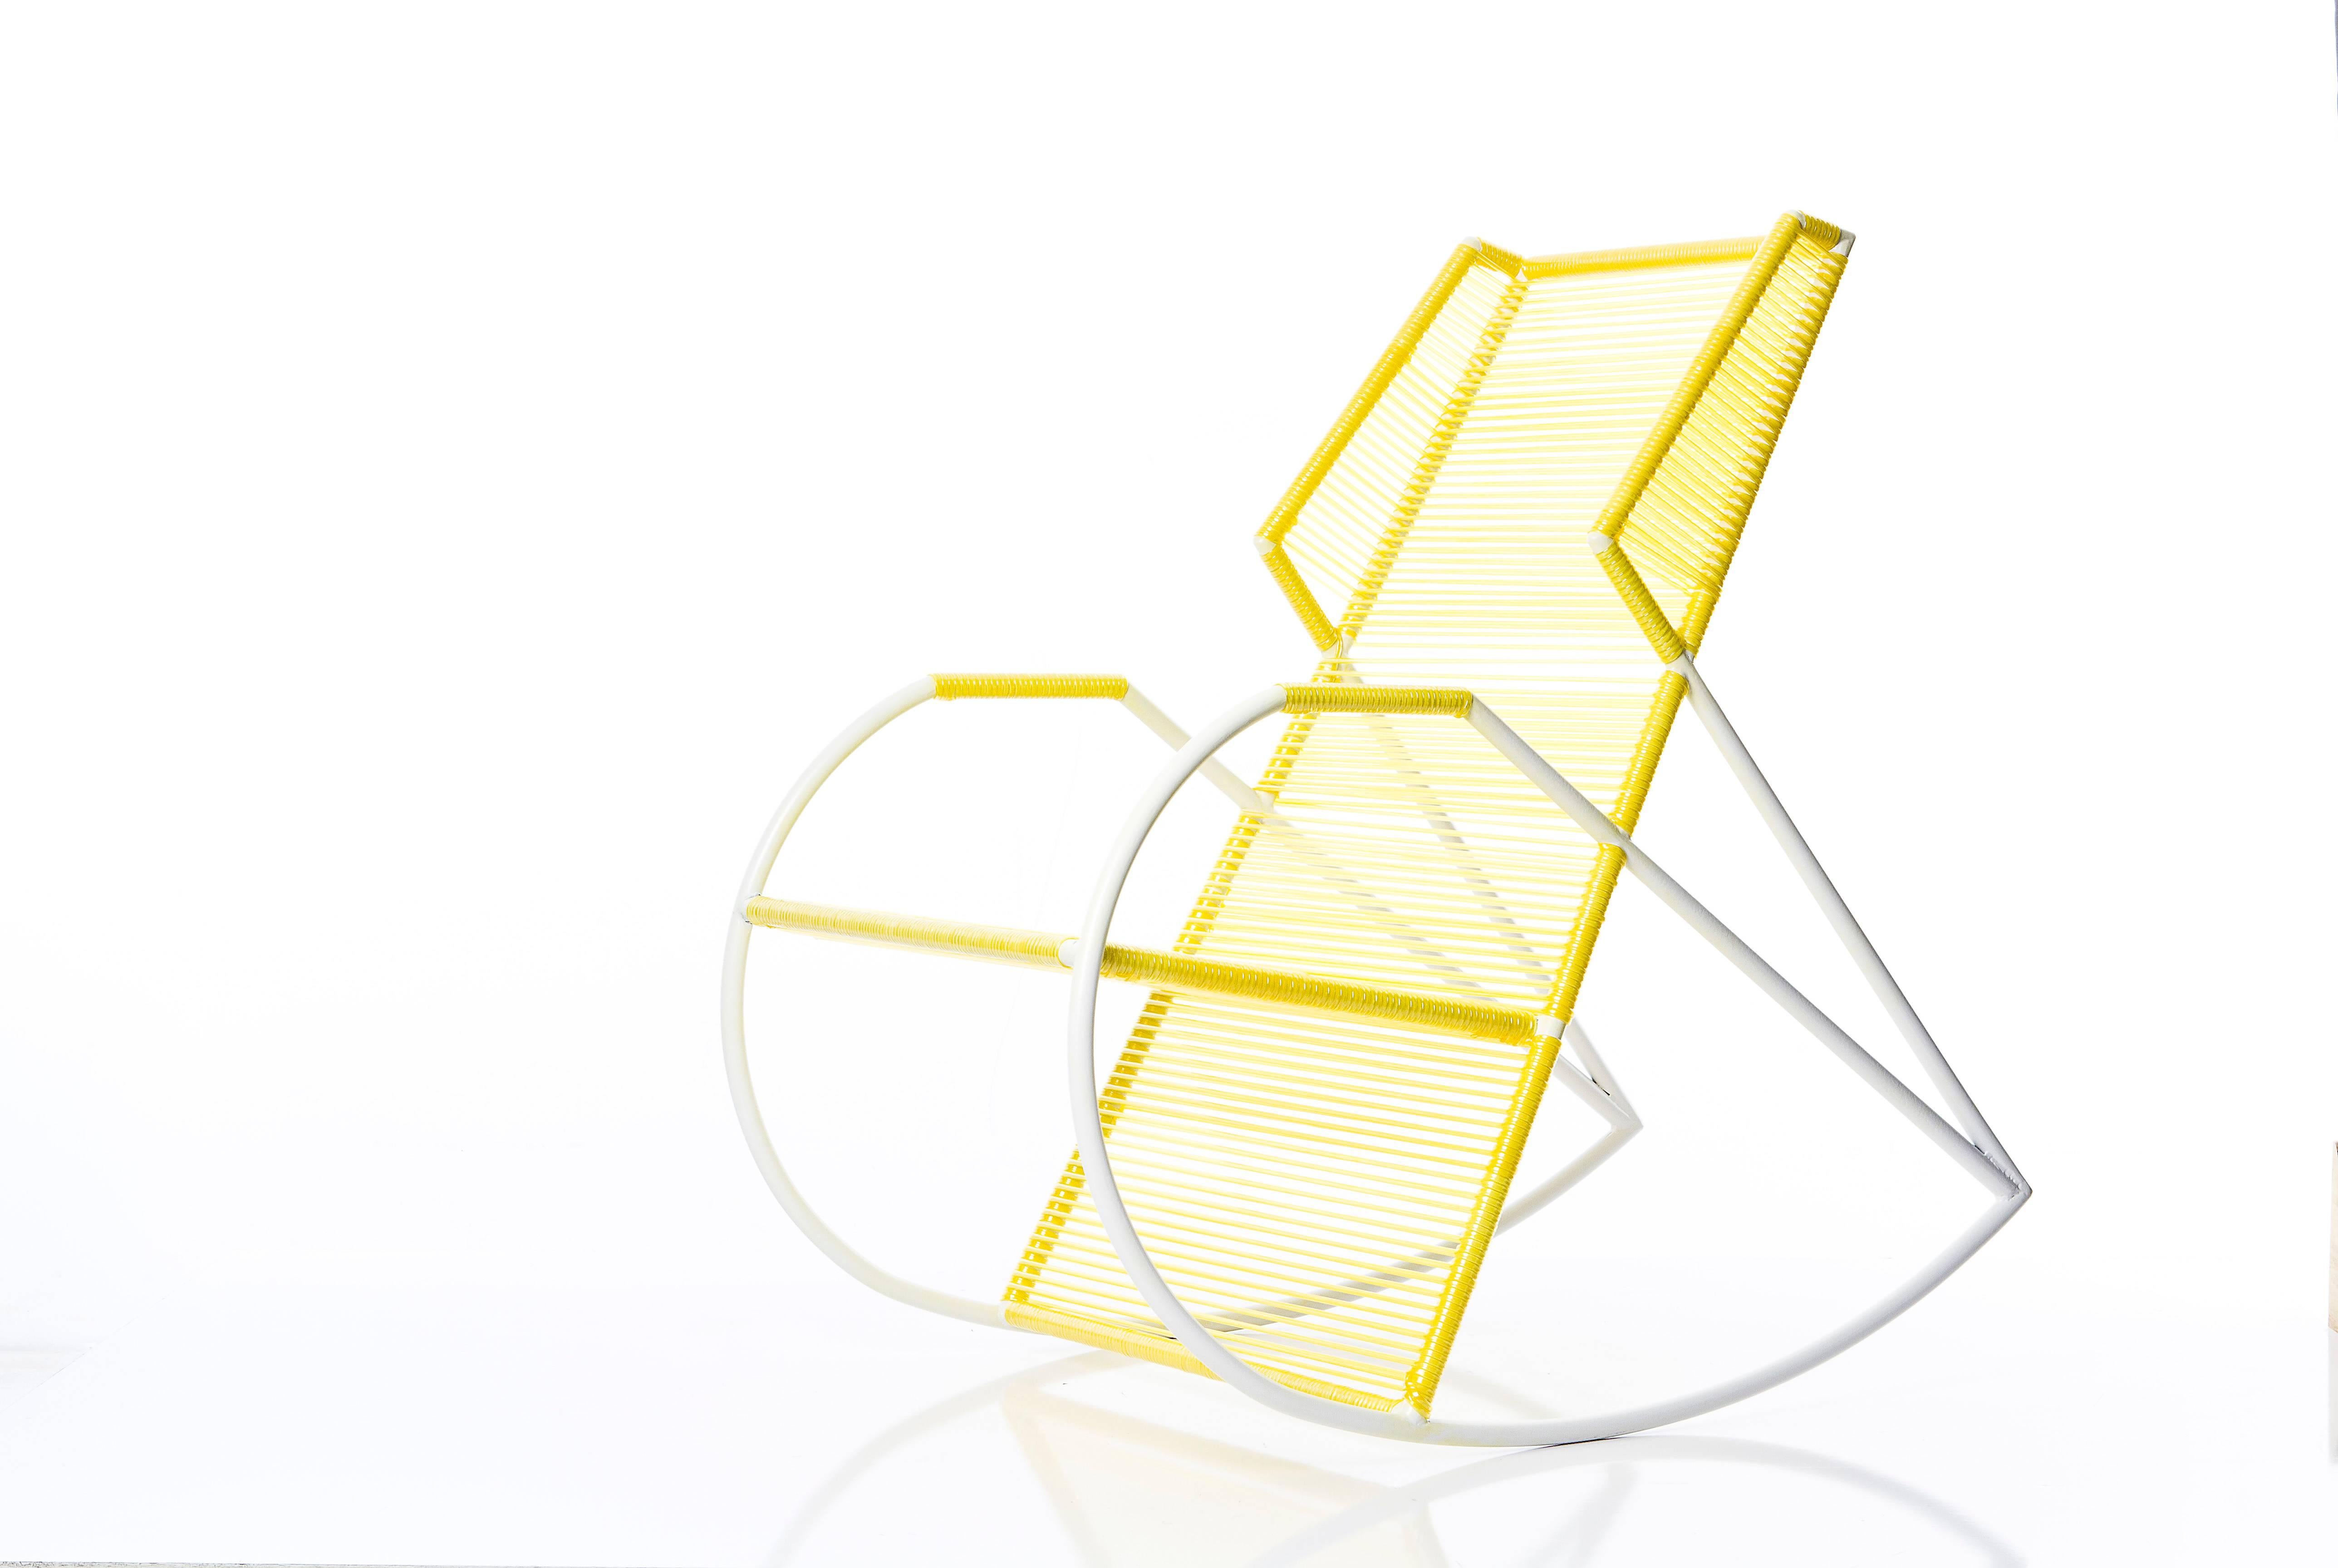 Noemia is a rocking chair designed for indoor and outdoor use in an aluminum frame with electrostatic paint and tapestry in a traditional Brazilian material commonly called spaghetti (rubber stripes). Both the structure and the spaghetti can be in